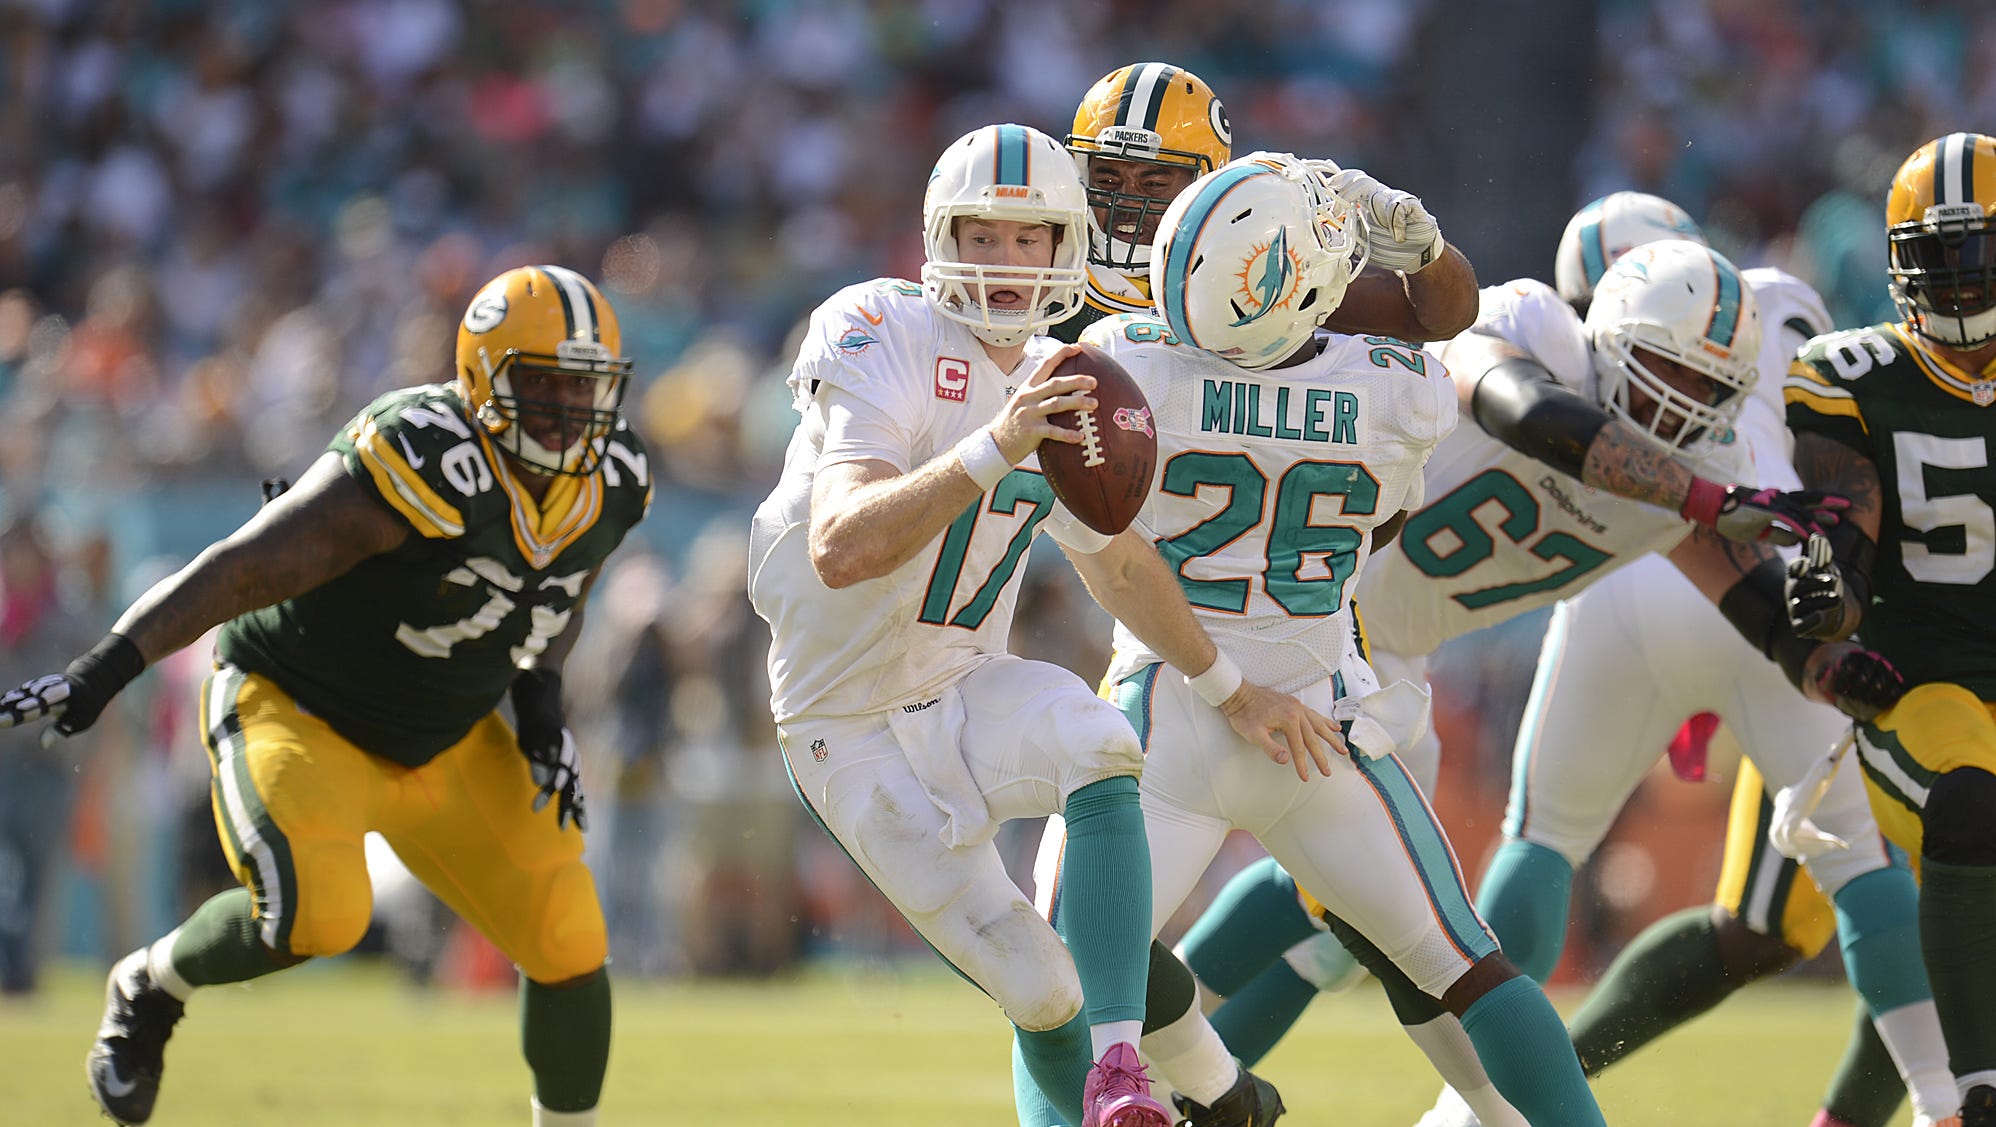 Miami Dolphins quarterback Ryan Tannehill (17) feels the pressure from the Packers defense on Oct. 11, 2014, at Sun Life Stadium in Miami.